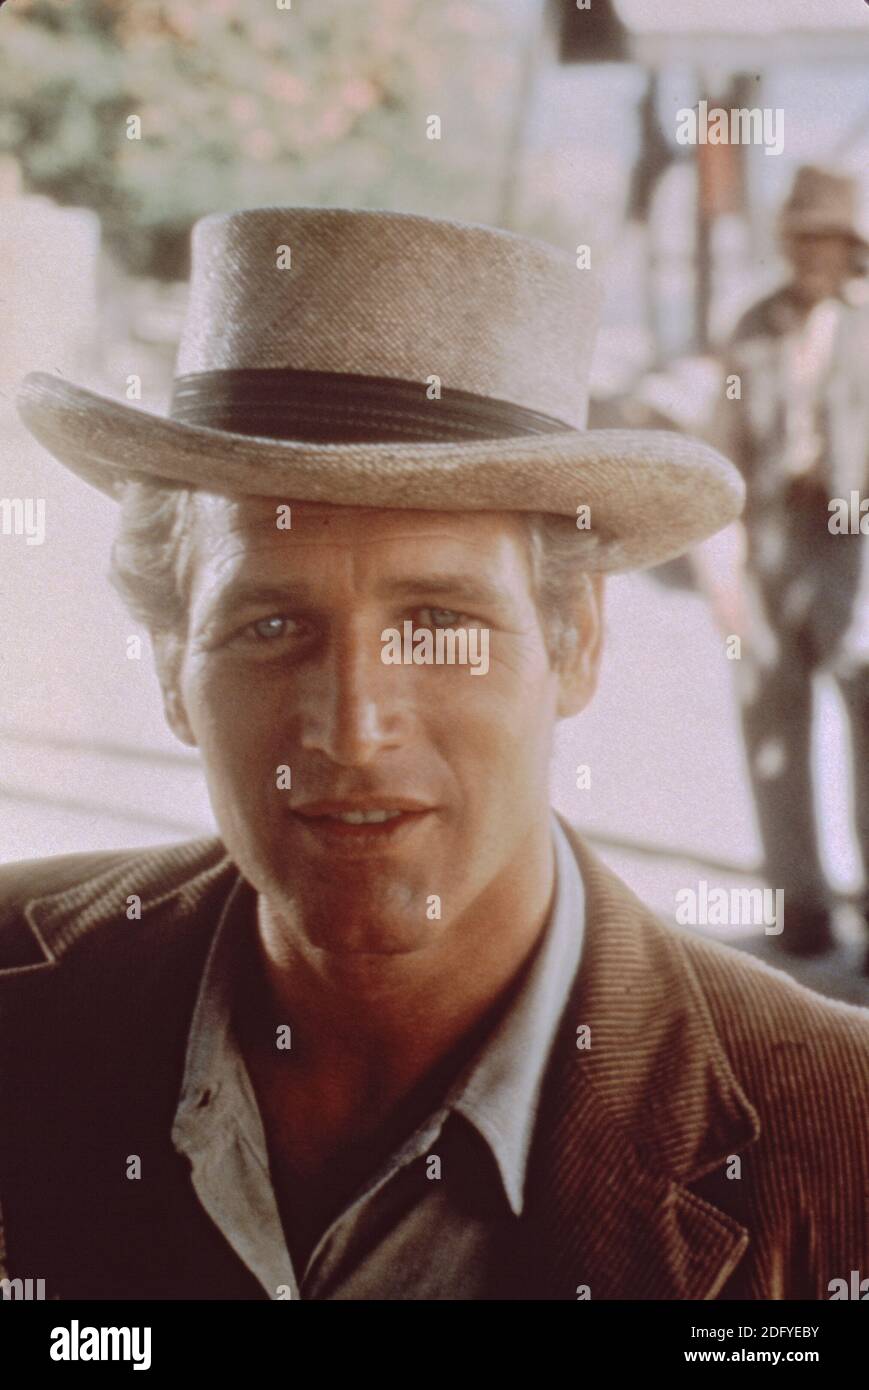 Butch Cassidy and the Sundance Kid star Paul Newman as outlaw Robert LeRoy Parker, known as Butch Cassidy Stock Photo